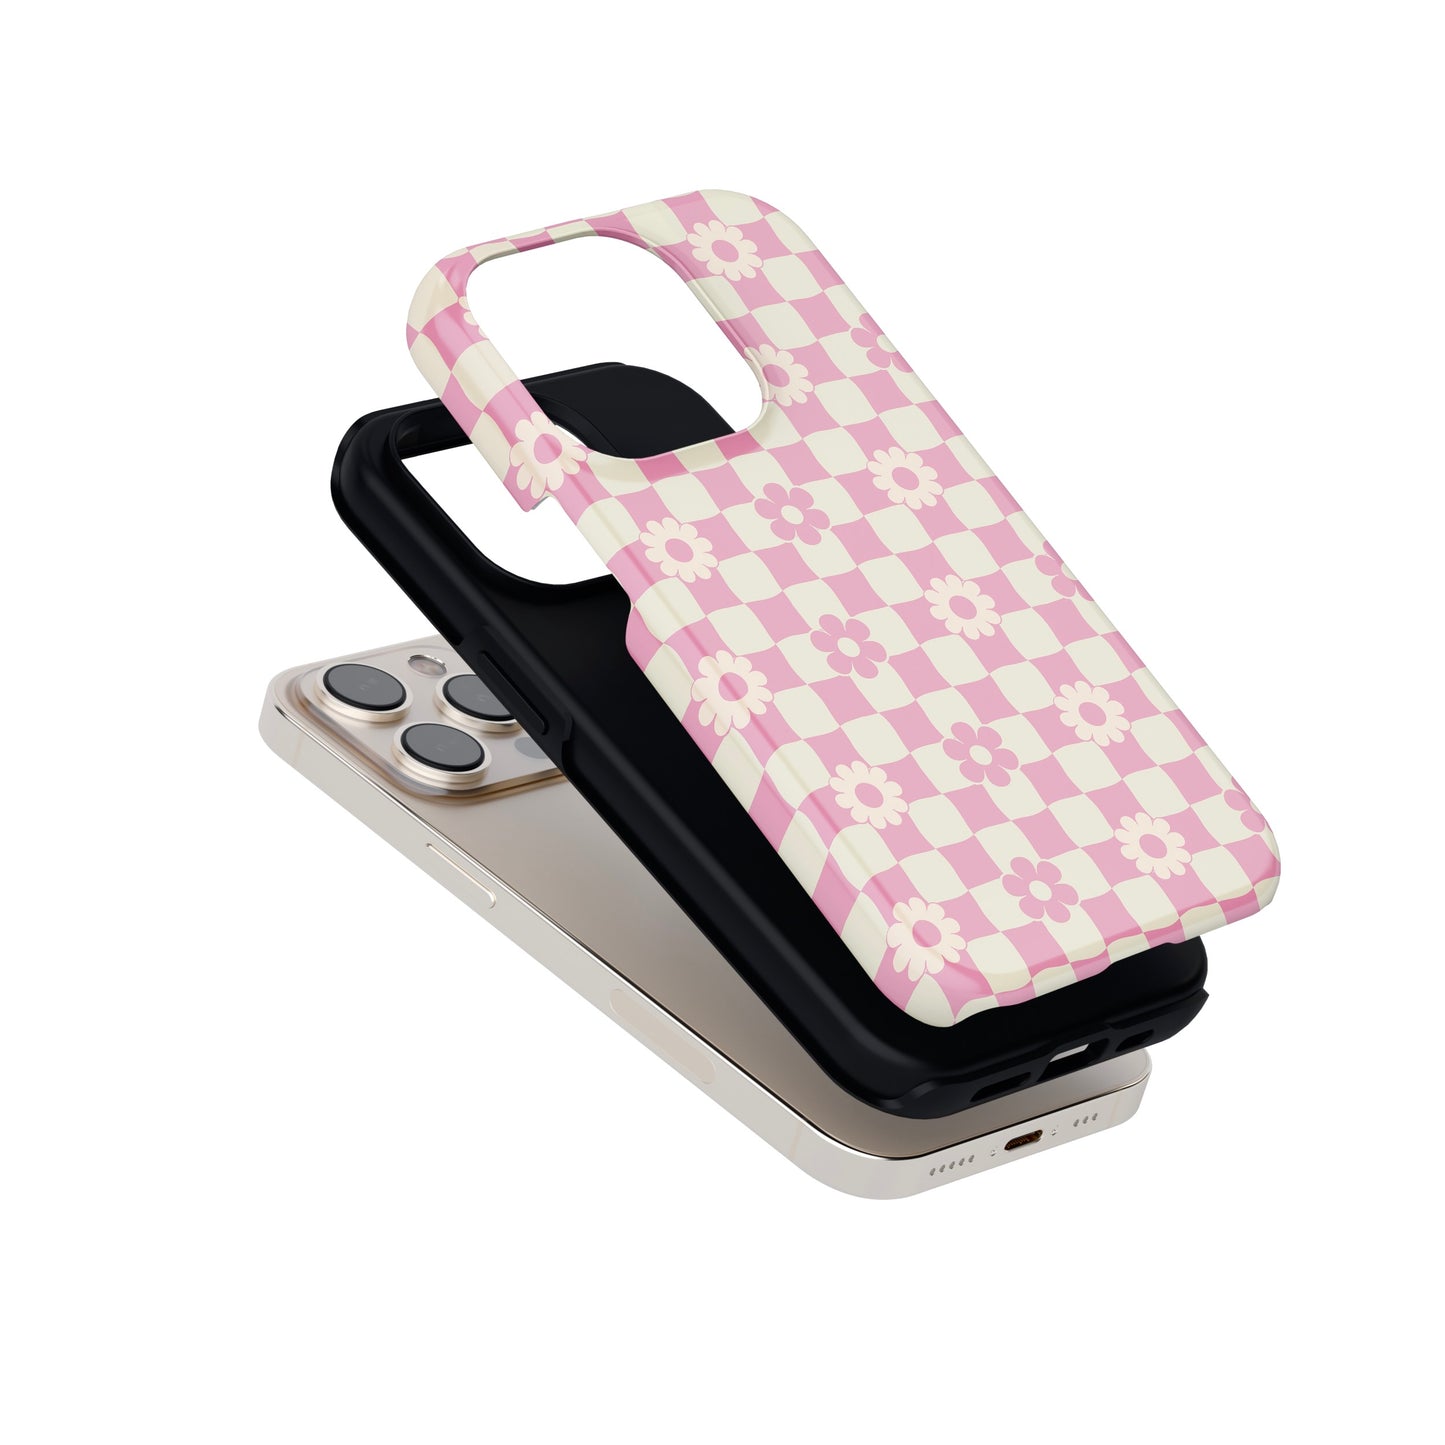 Roller Rink Tough iPhone Case